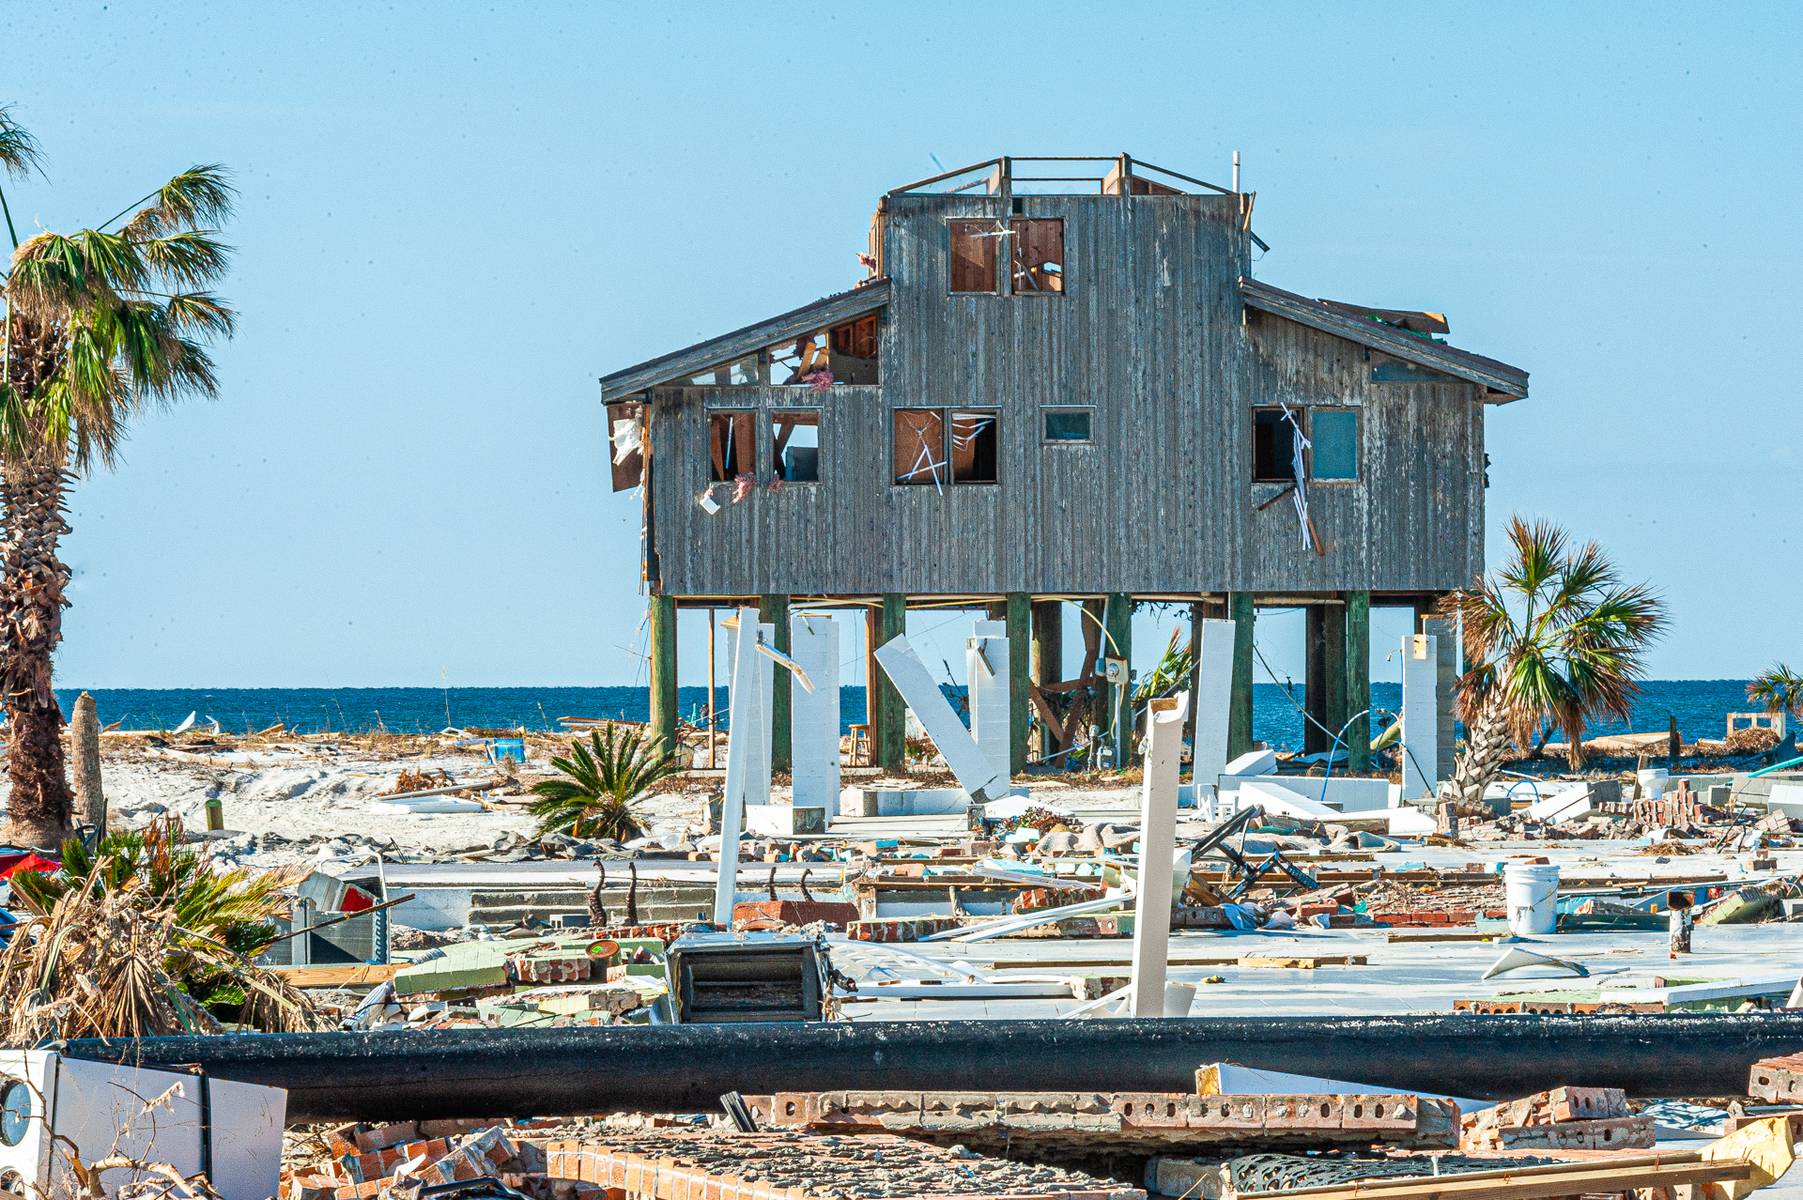 October 18, 2018 - Mexico Beach, FL - An elevated house that   came through Hurricane Michael almost unscathed. The strongest storm on record to ever make landfall in Northwest Florida, and the fourth most powerful to ever hit the continental United States.